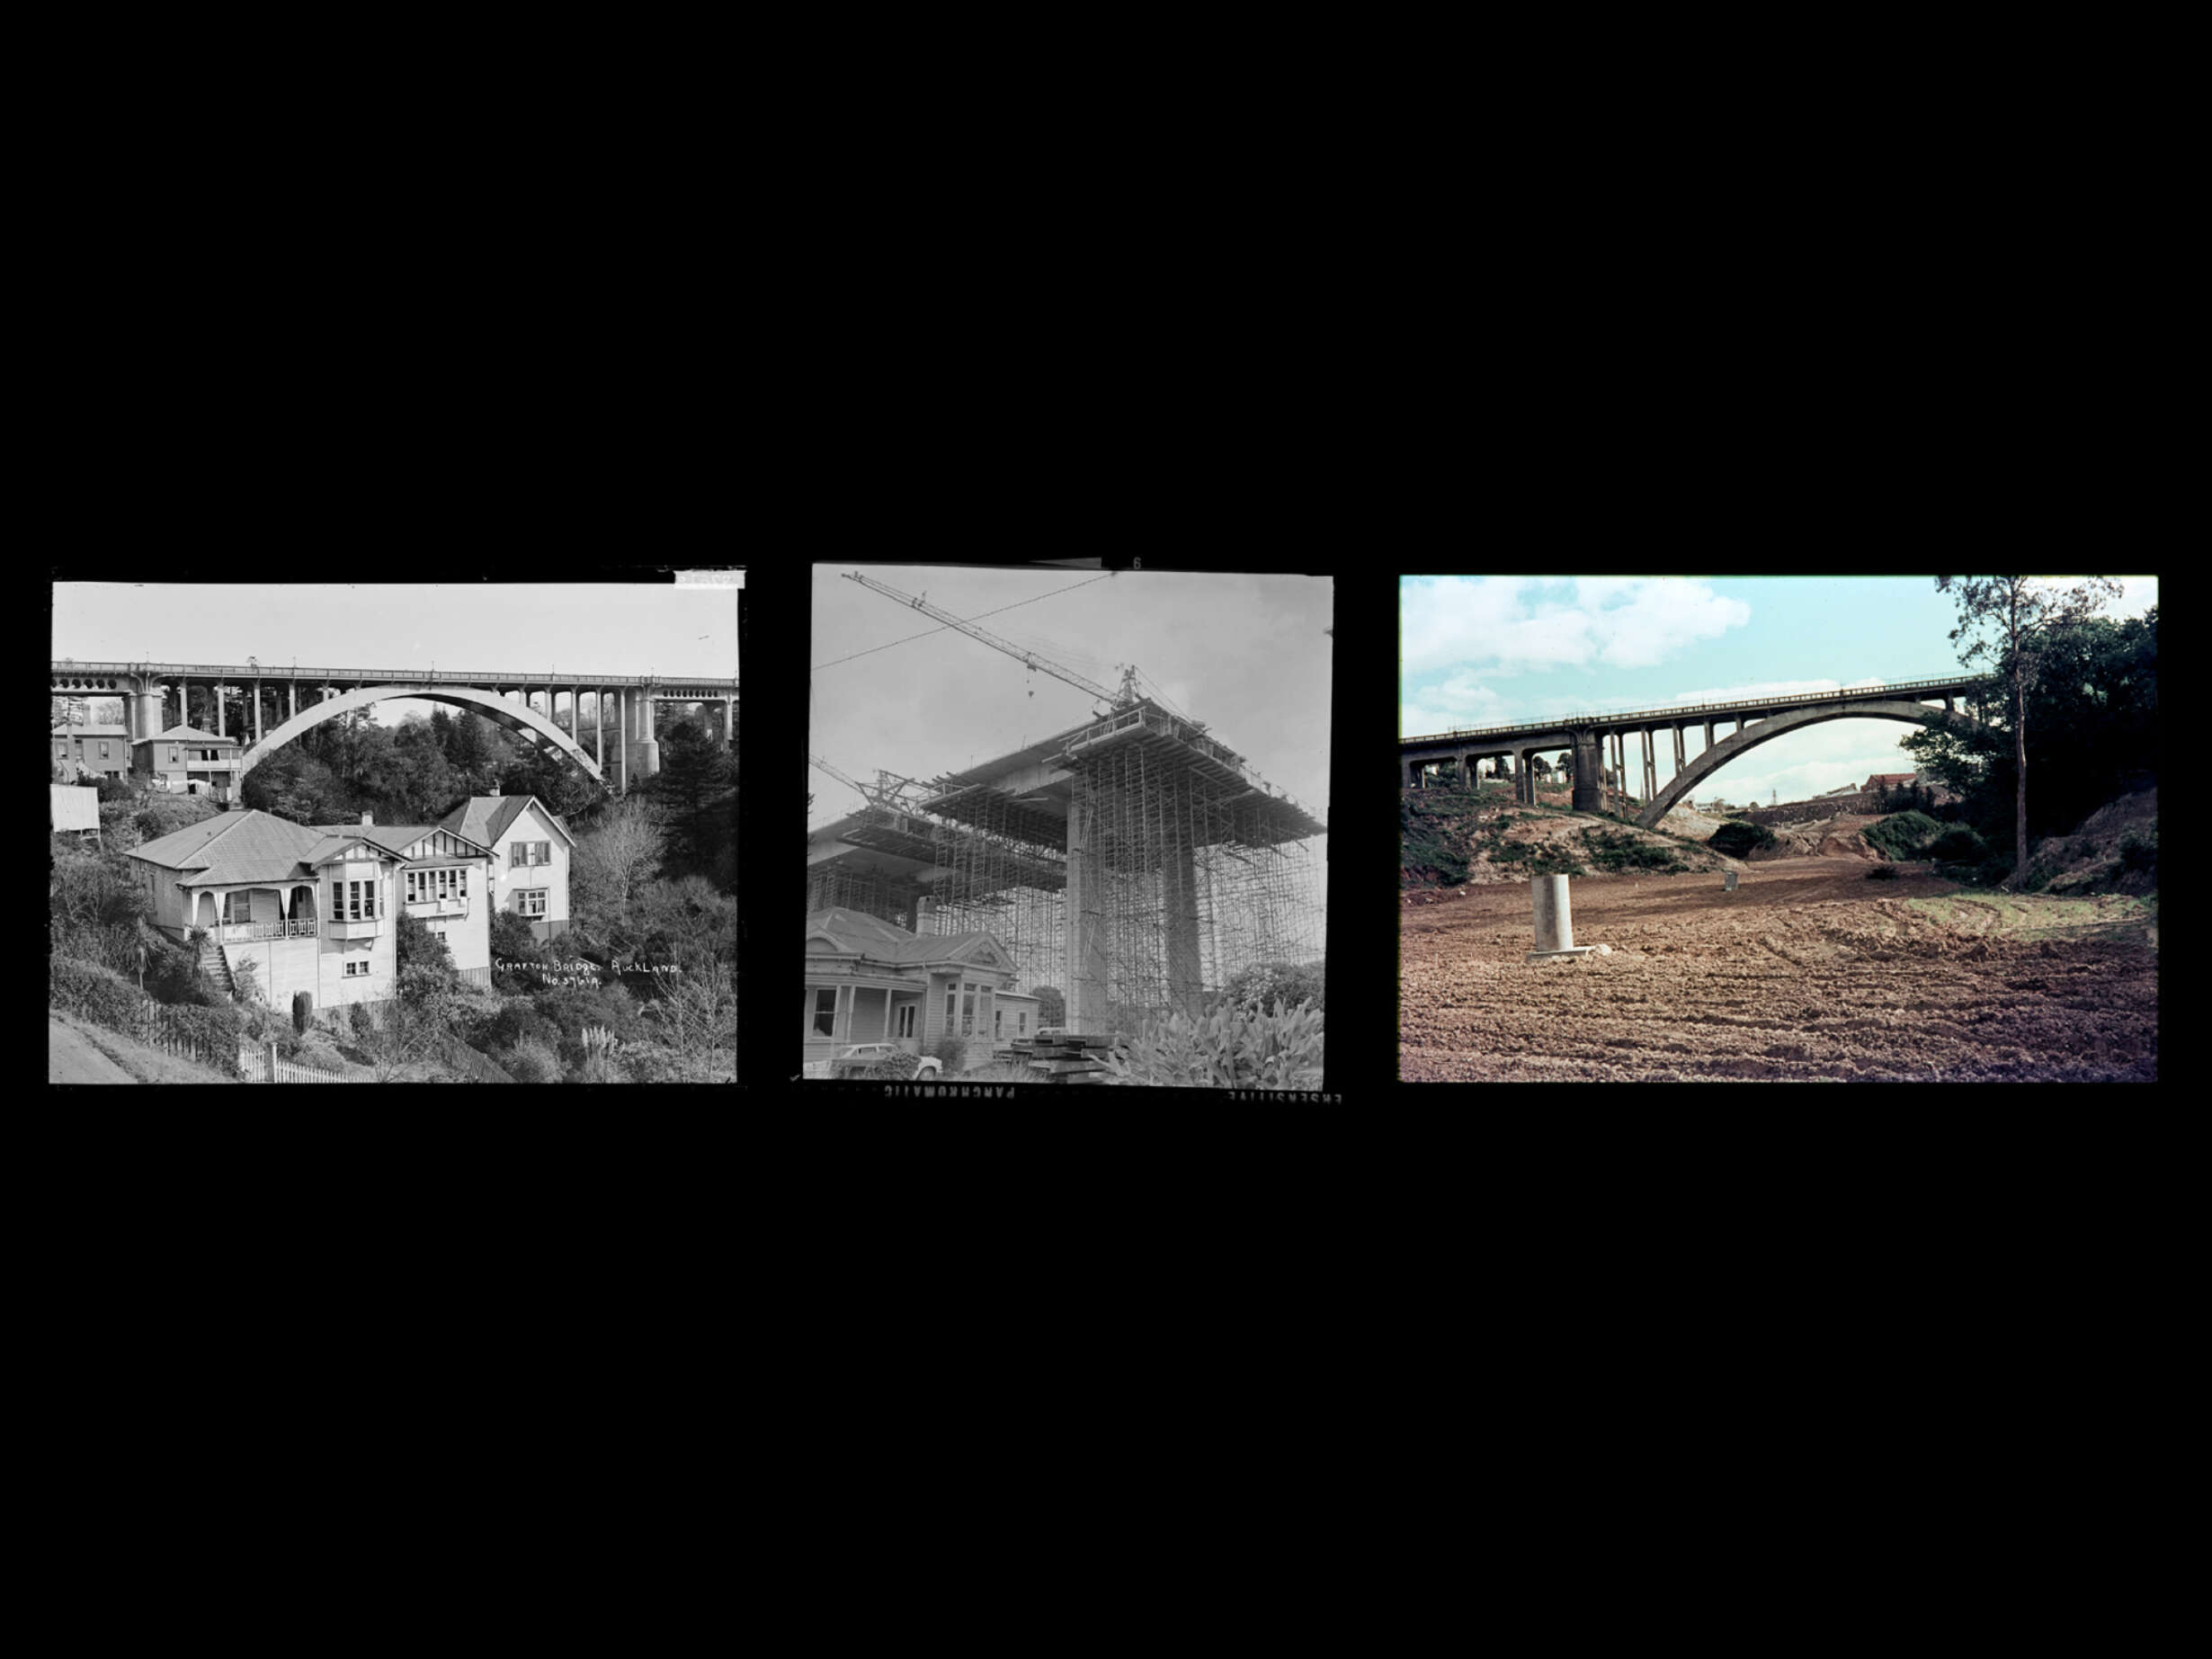 Houses of Grafton Gully, eventually to be cleared, c.a. 1913; Construction of the southern motorway viaduct in Newmarket, January 12, 1965; Gully clearance, c.a. 1969.